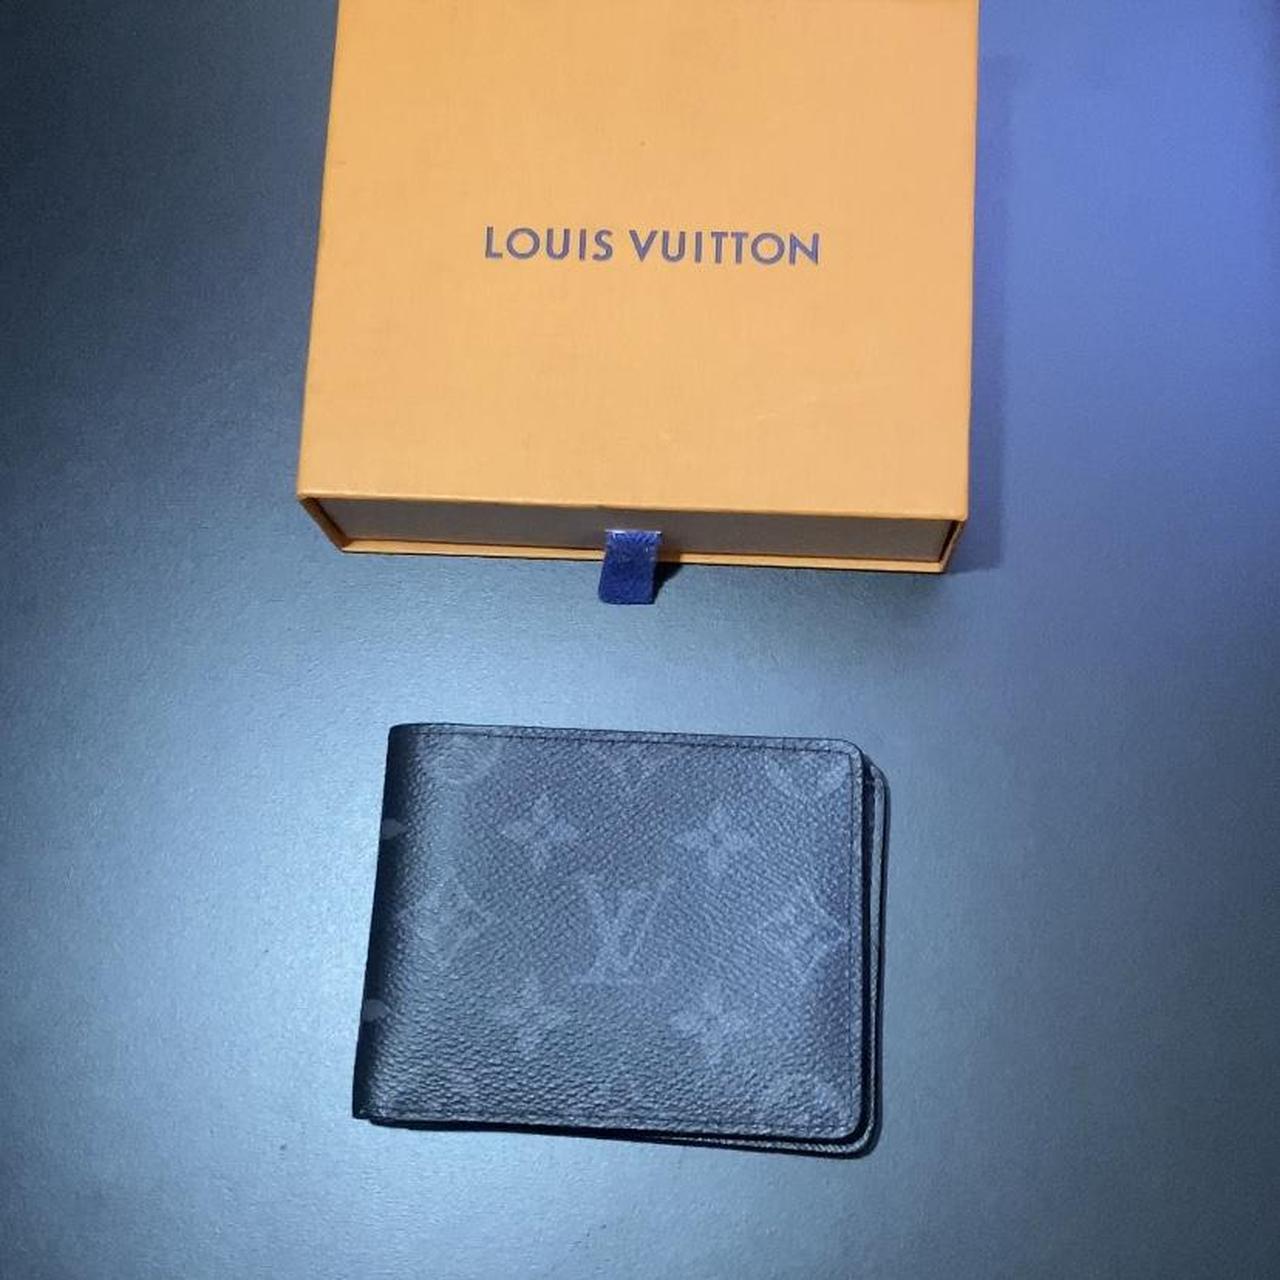 Gently used Louis Vuitton wallet. I don't want it - Depop